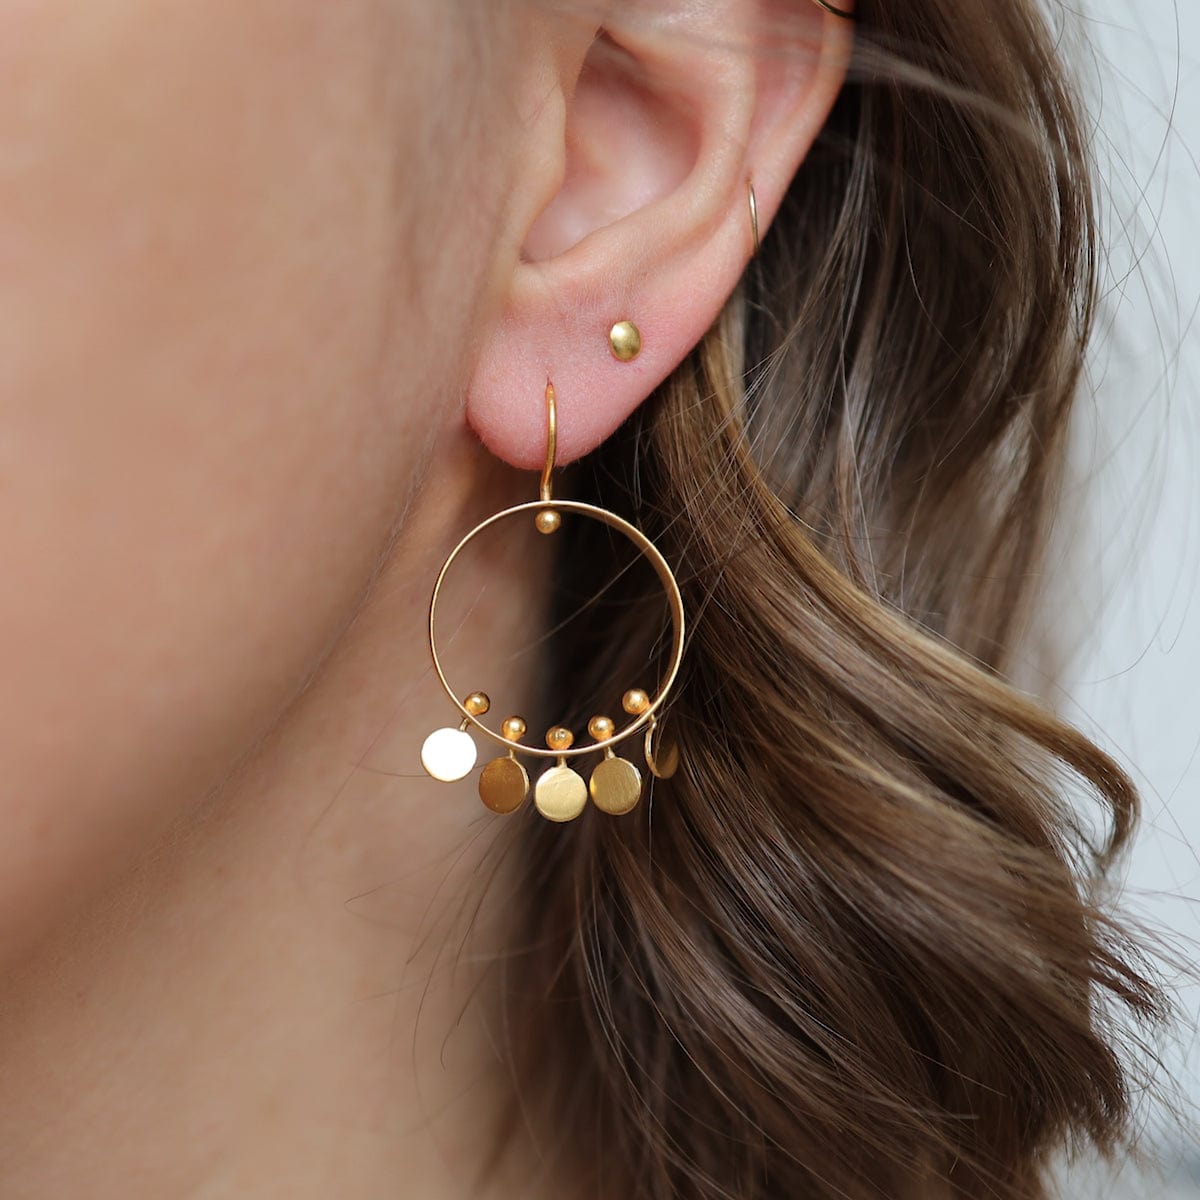 EAR-GPL Gold Plated Circle Mobile With Spinning Disc Drop Earrings